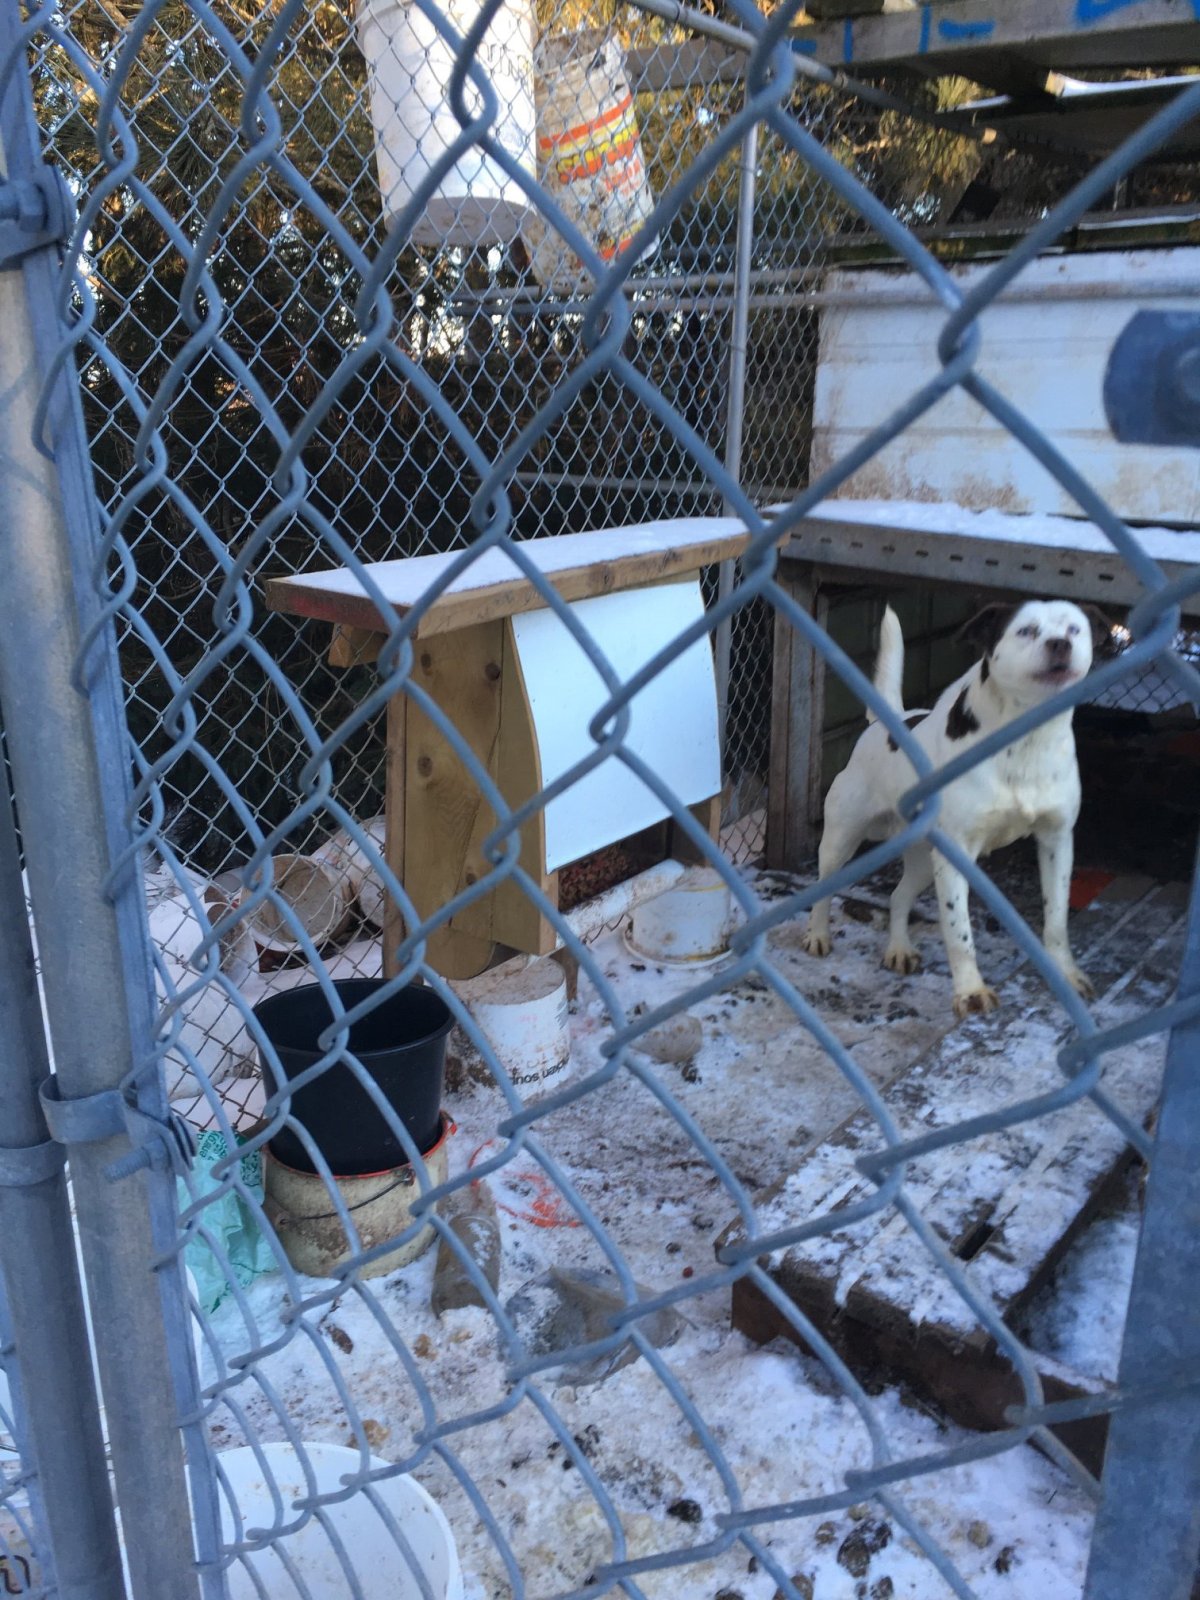 The Nova Scotia SPCA found two dogs living in poor conditions  on Jan. 10. David Weatherbee of Scotsburn, N.S., has been handed a lifetime ban on owning domestic animals.